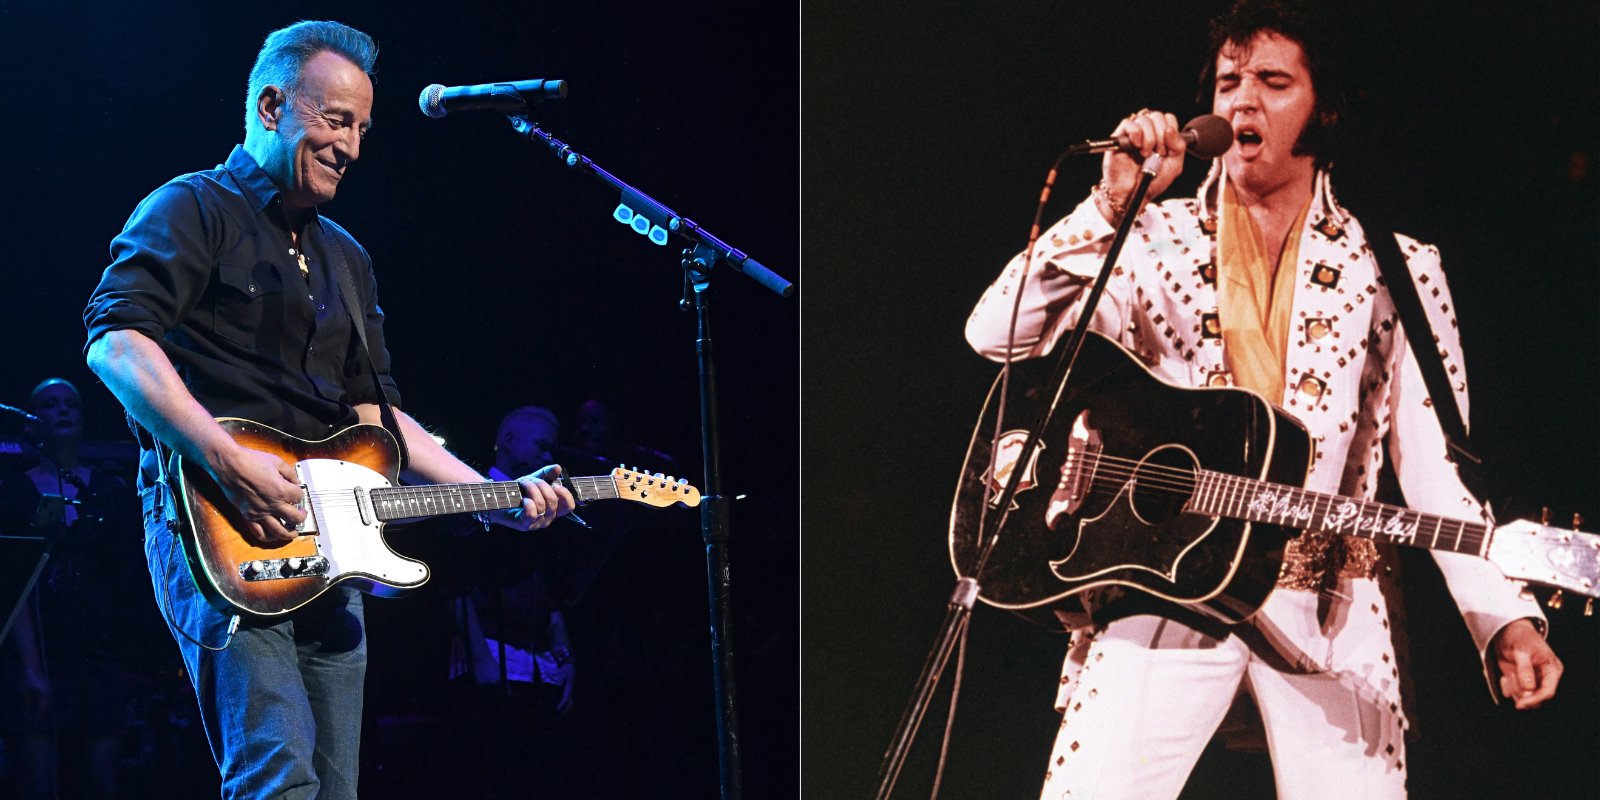 Bruce Springsteen and Elvis Presley in a series of photos side by side.